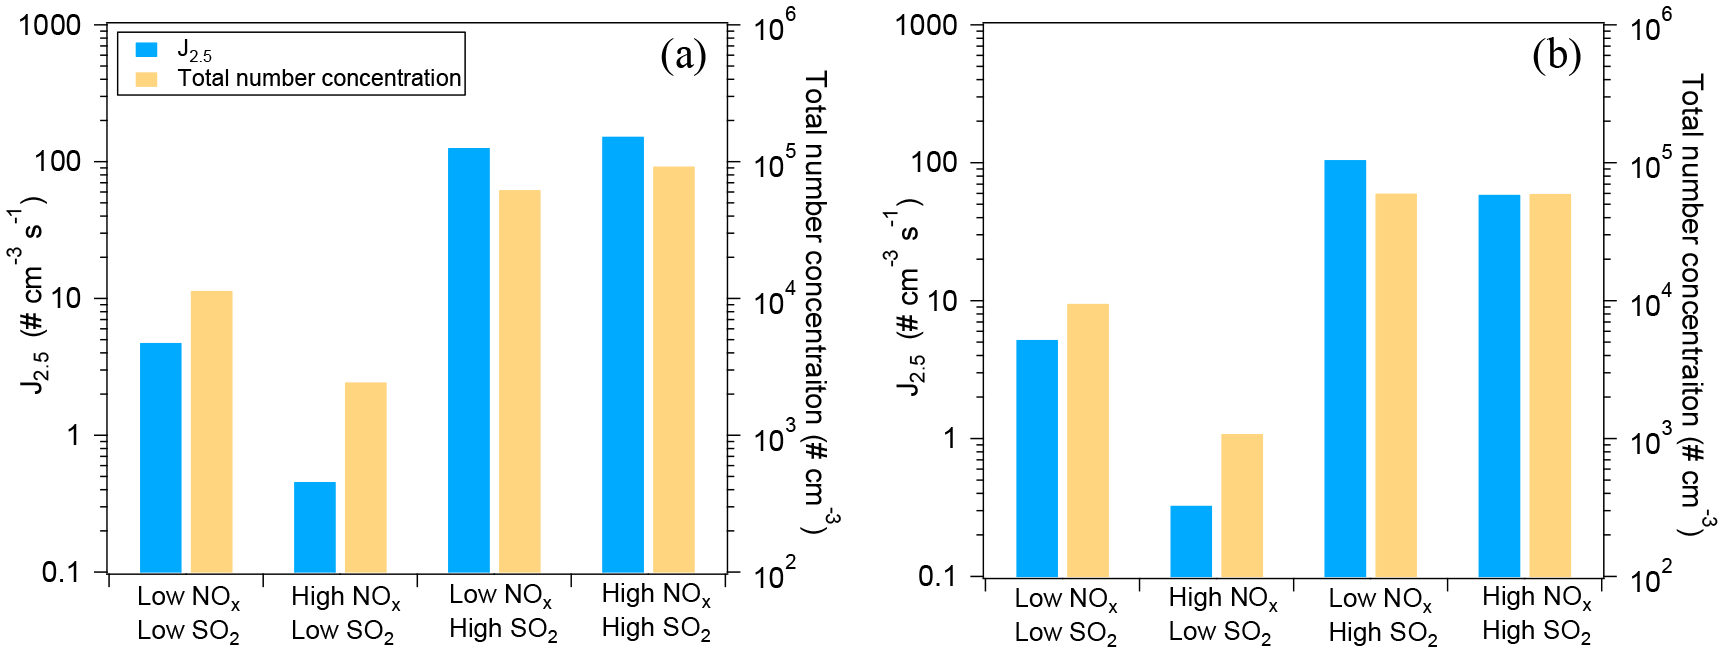 Acp Effects Of Nox And So2 On The Secondary Organic Aerosol Formation From Photooxidation Of A Pinene And Limonene